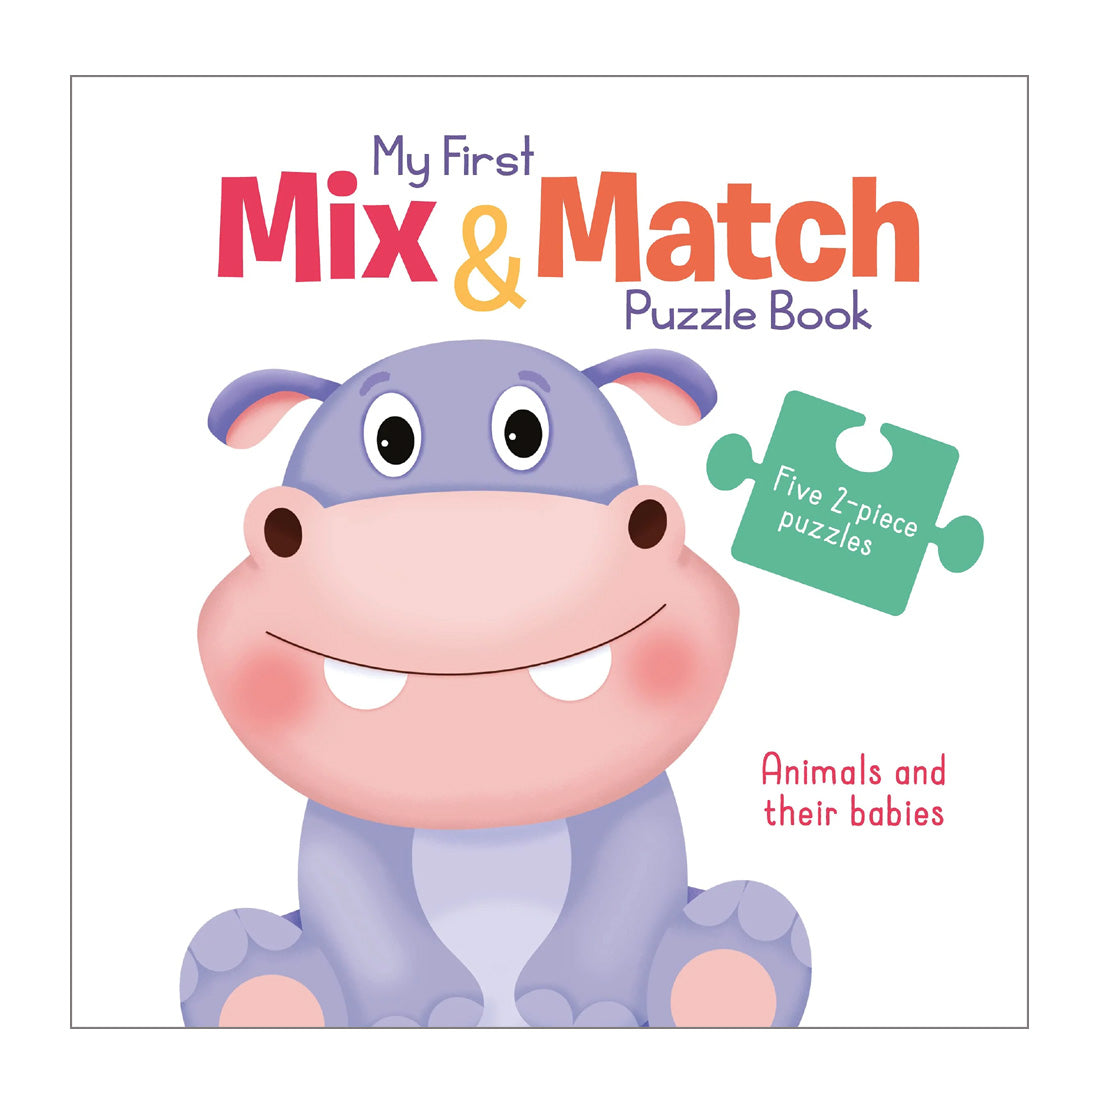 Mix & Match Puzzle Book: Animals & Their Babies